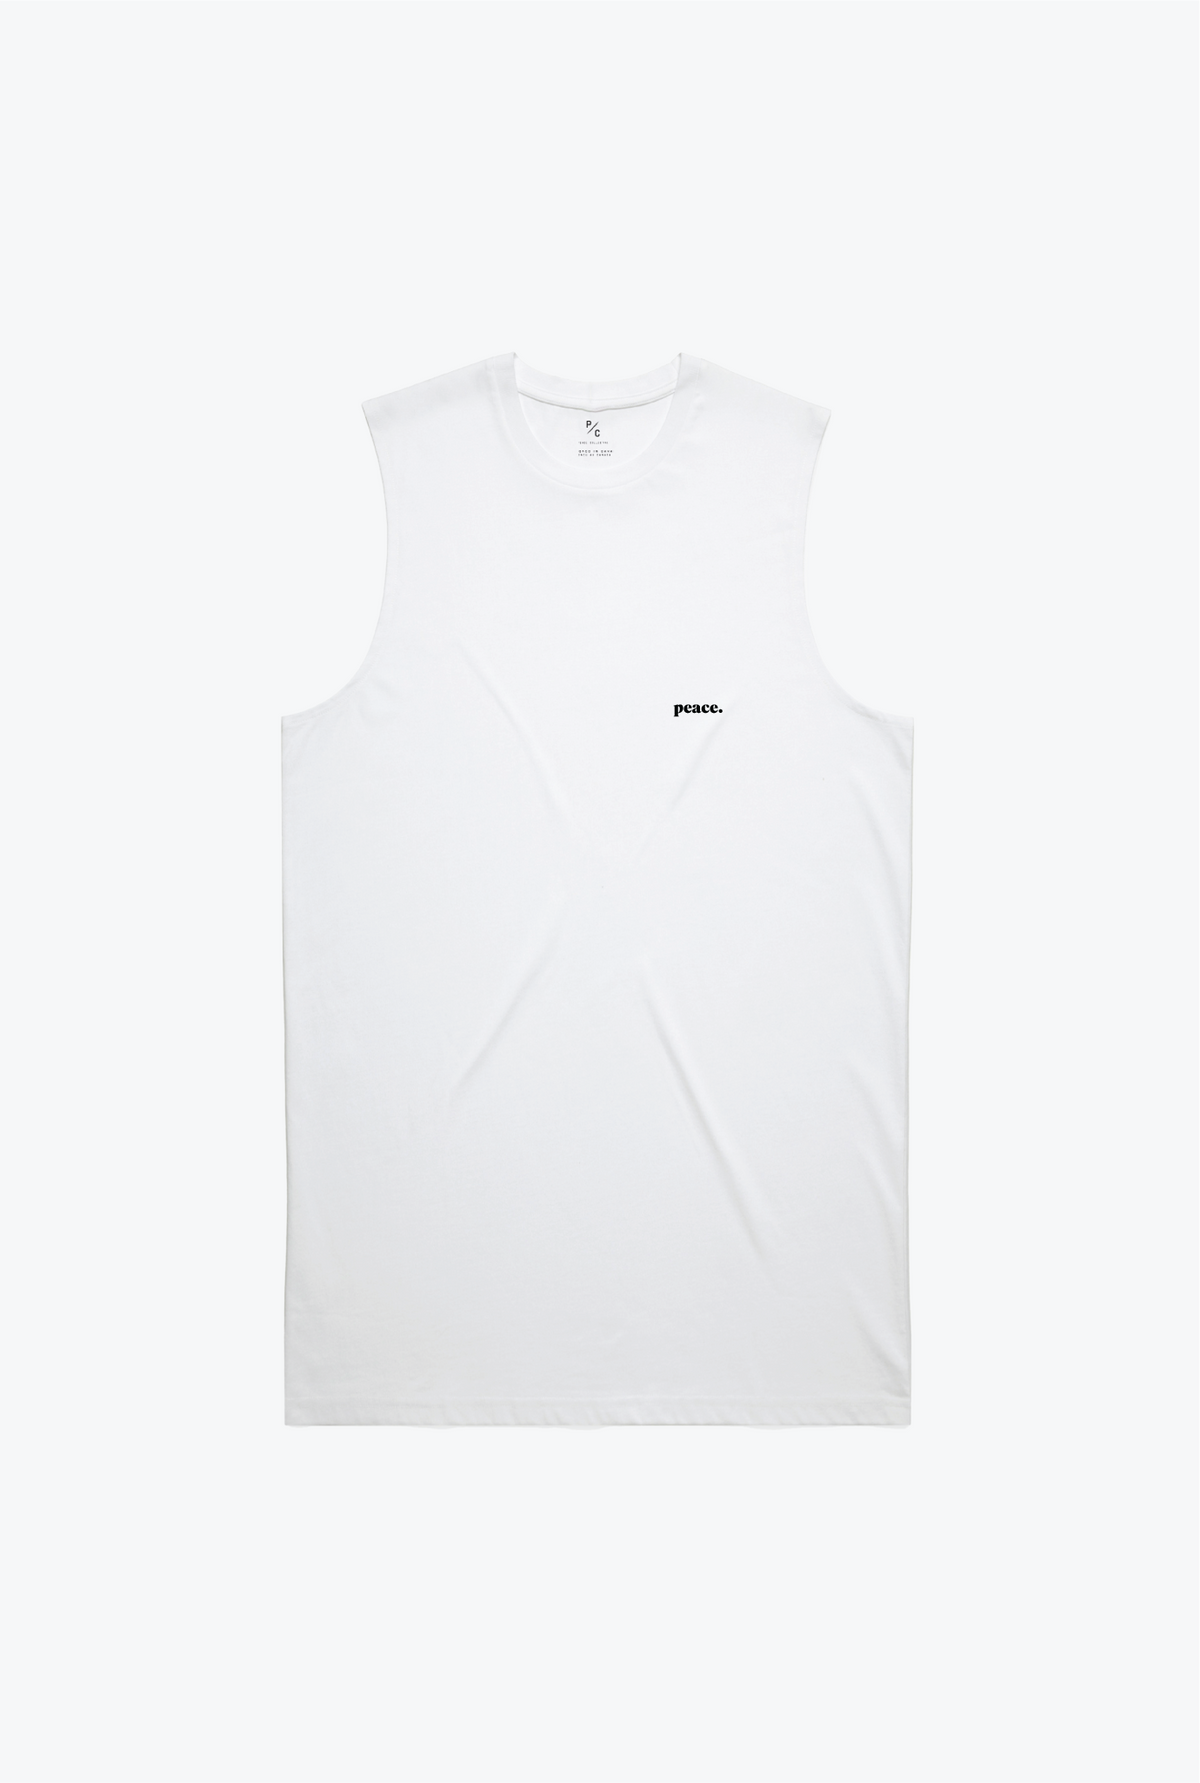 Peace Muscle Tank - White